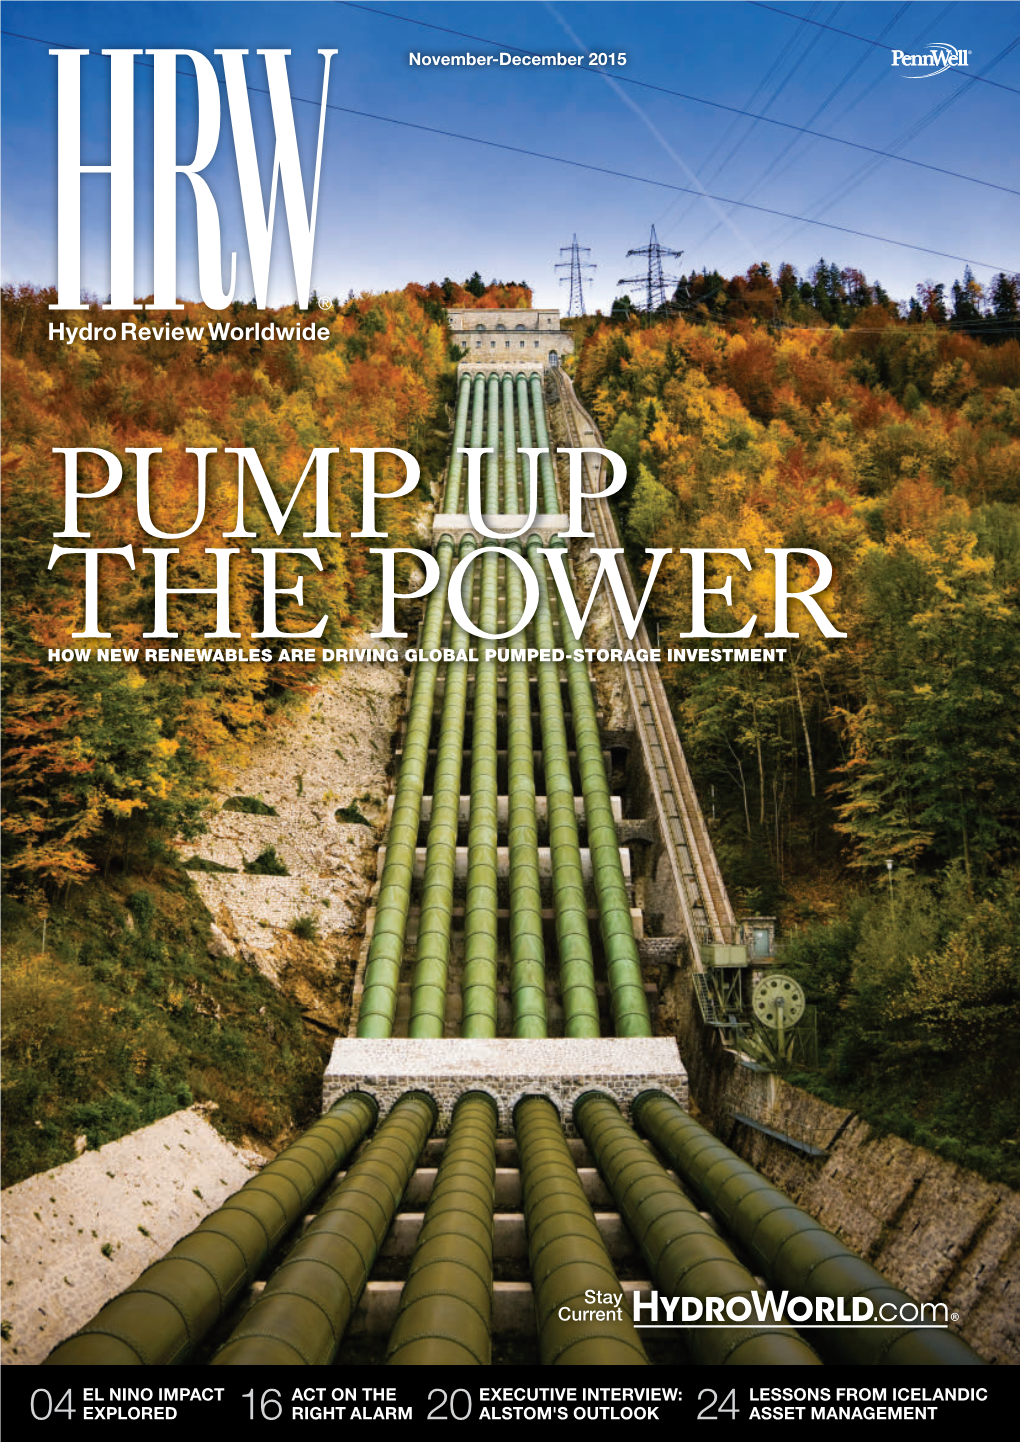 Hydro Review Worldwide PUMP up the POWER HOW NEW RENEWABLES ARE DRIVING GLOBAL PUMPED-STORAGE INVESTMENT